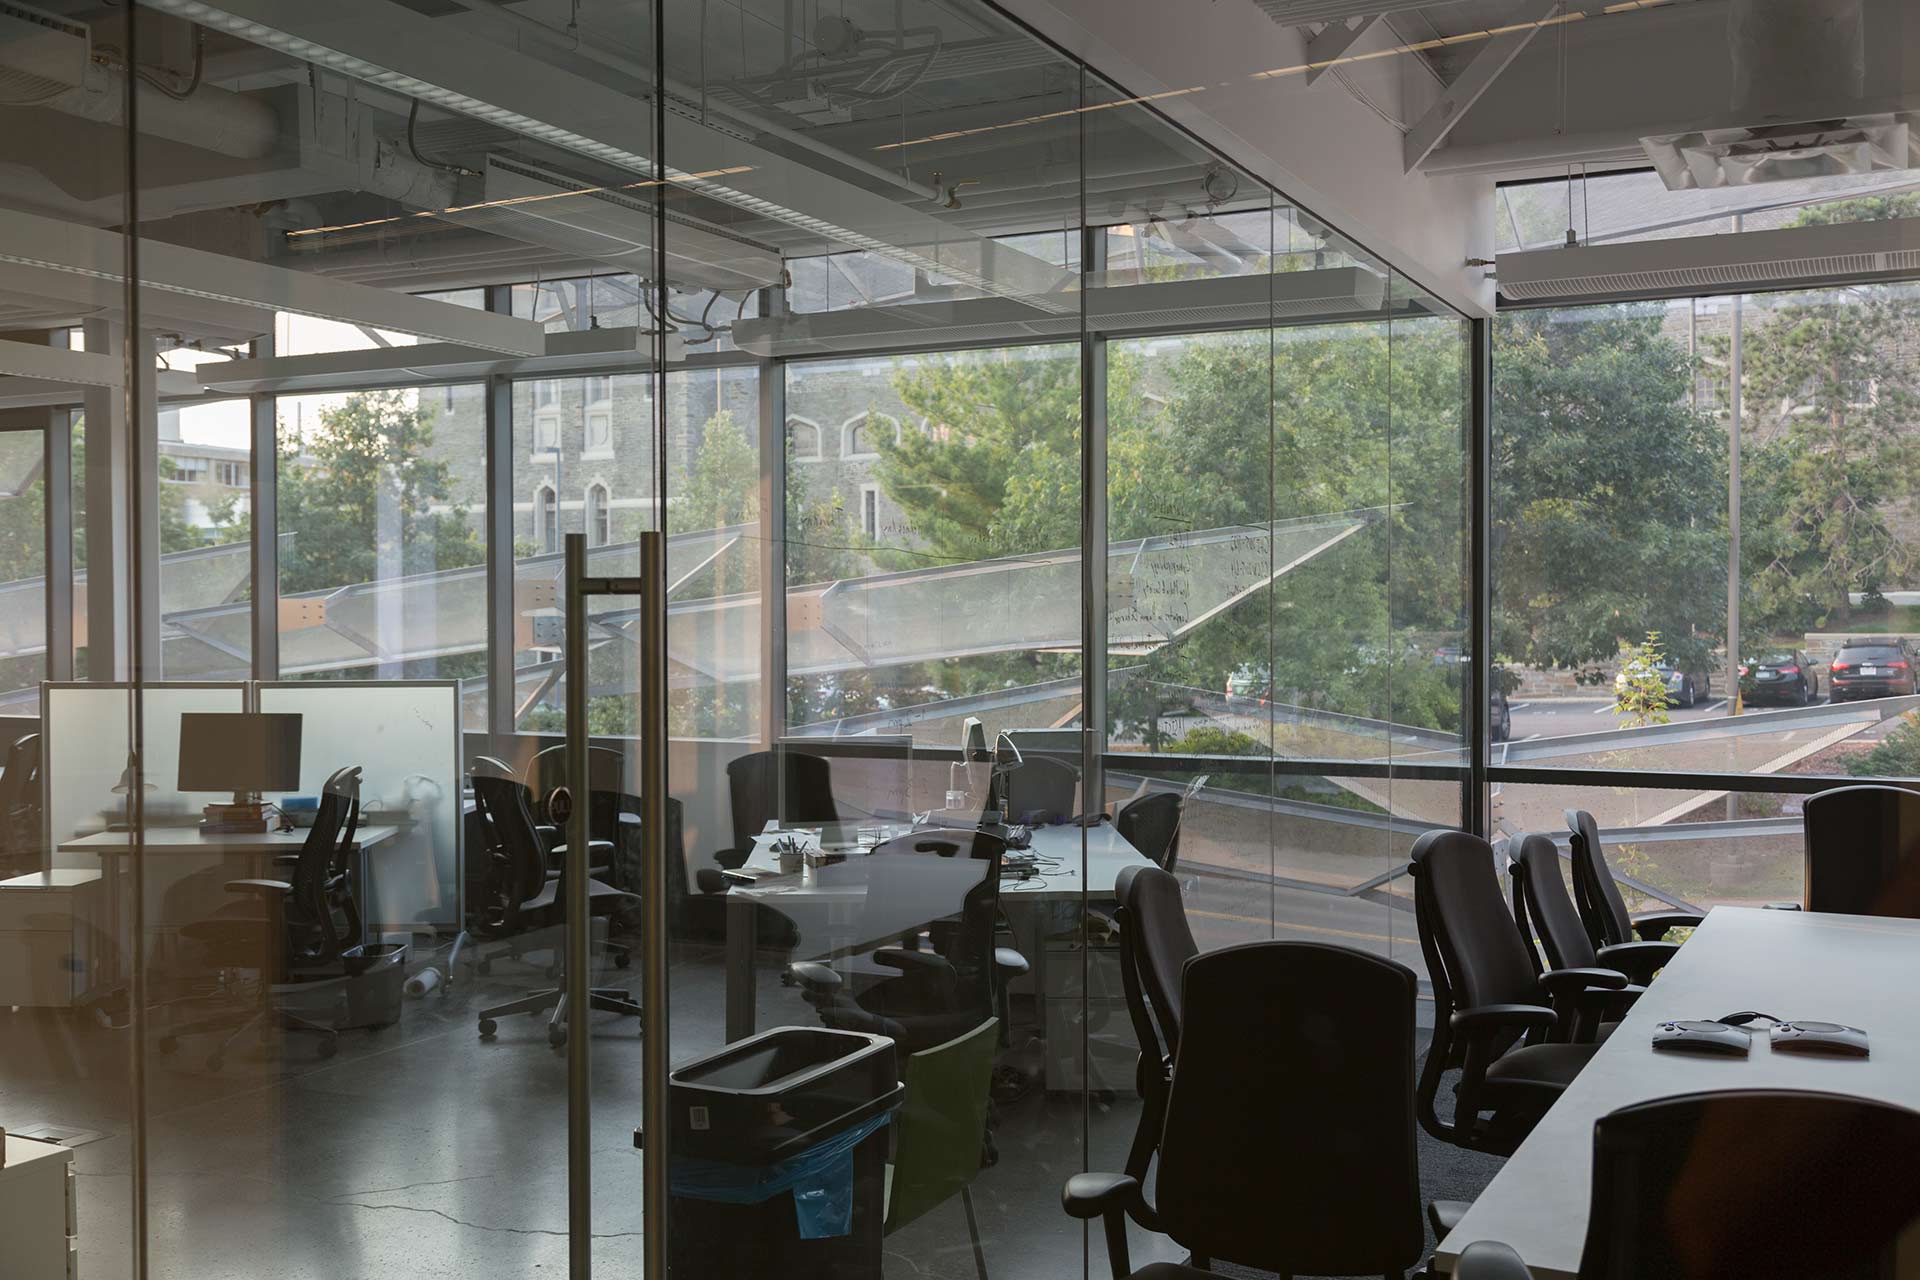 Metal panel system provide the building's offices with natural light and shading.